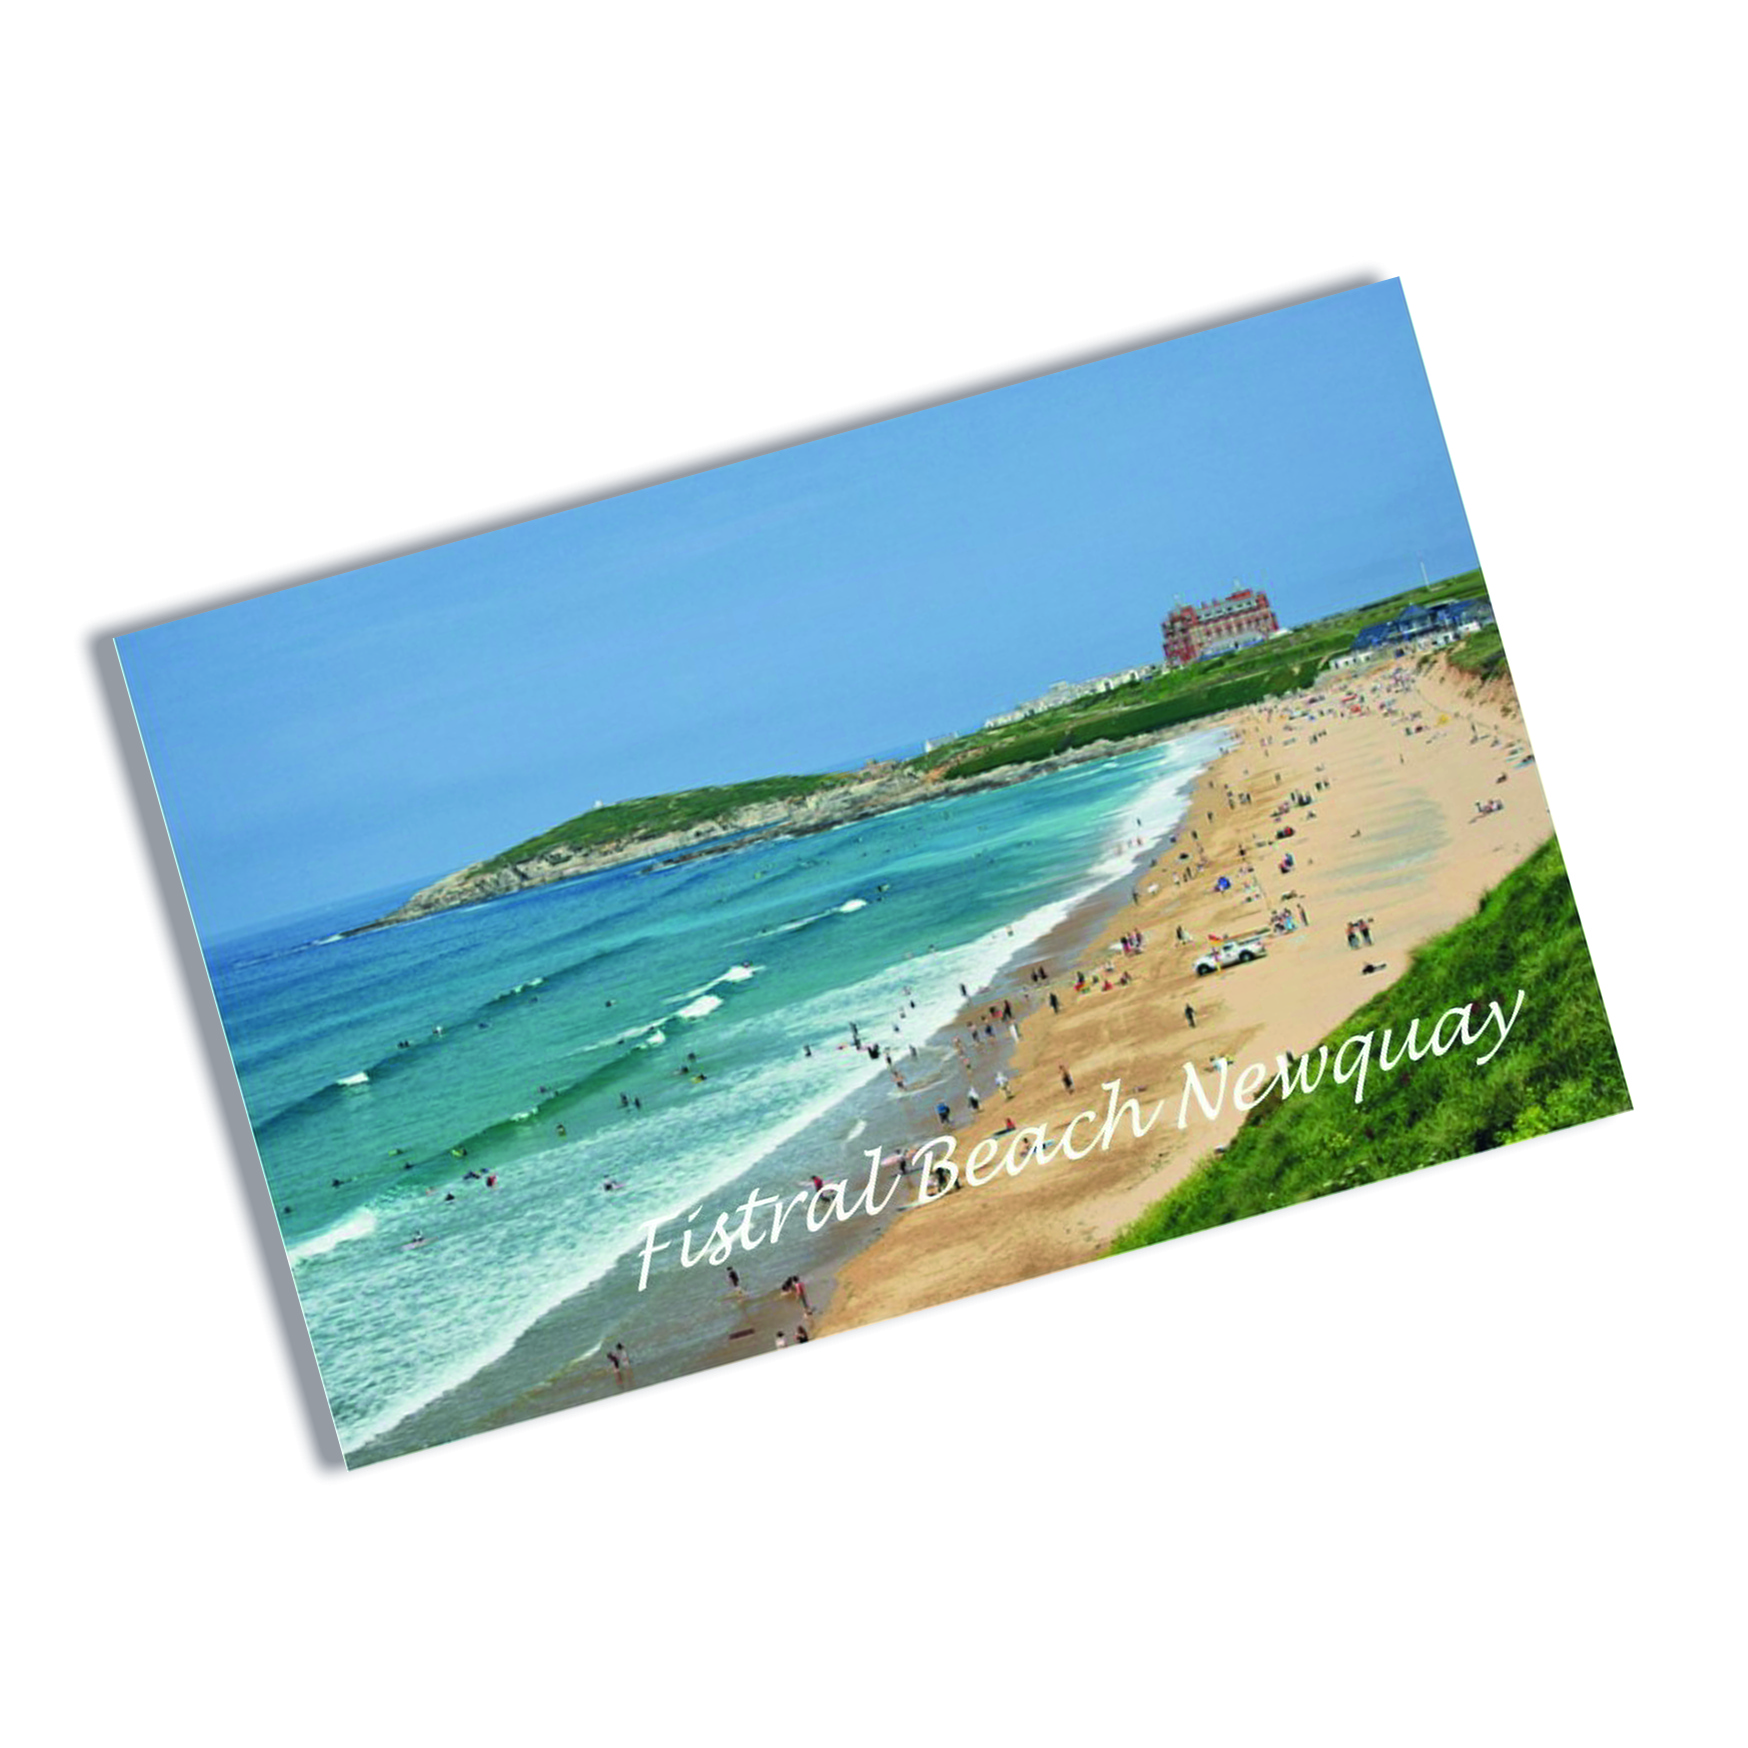 Tin Plate Magnet Fistral Beach Newquay